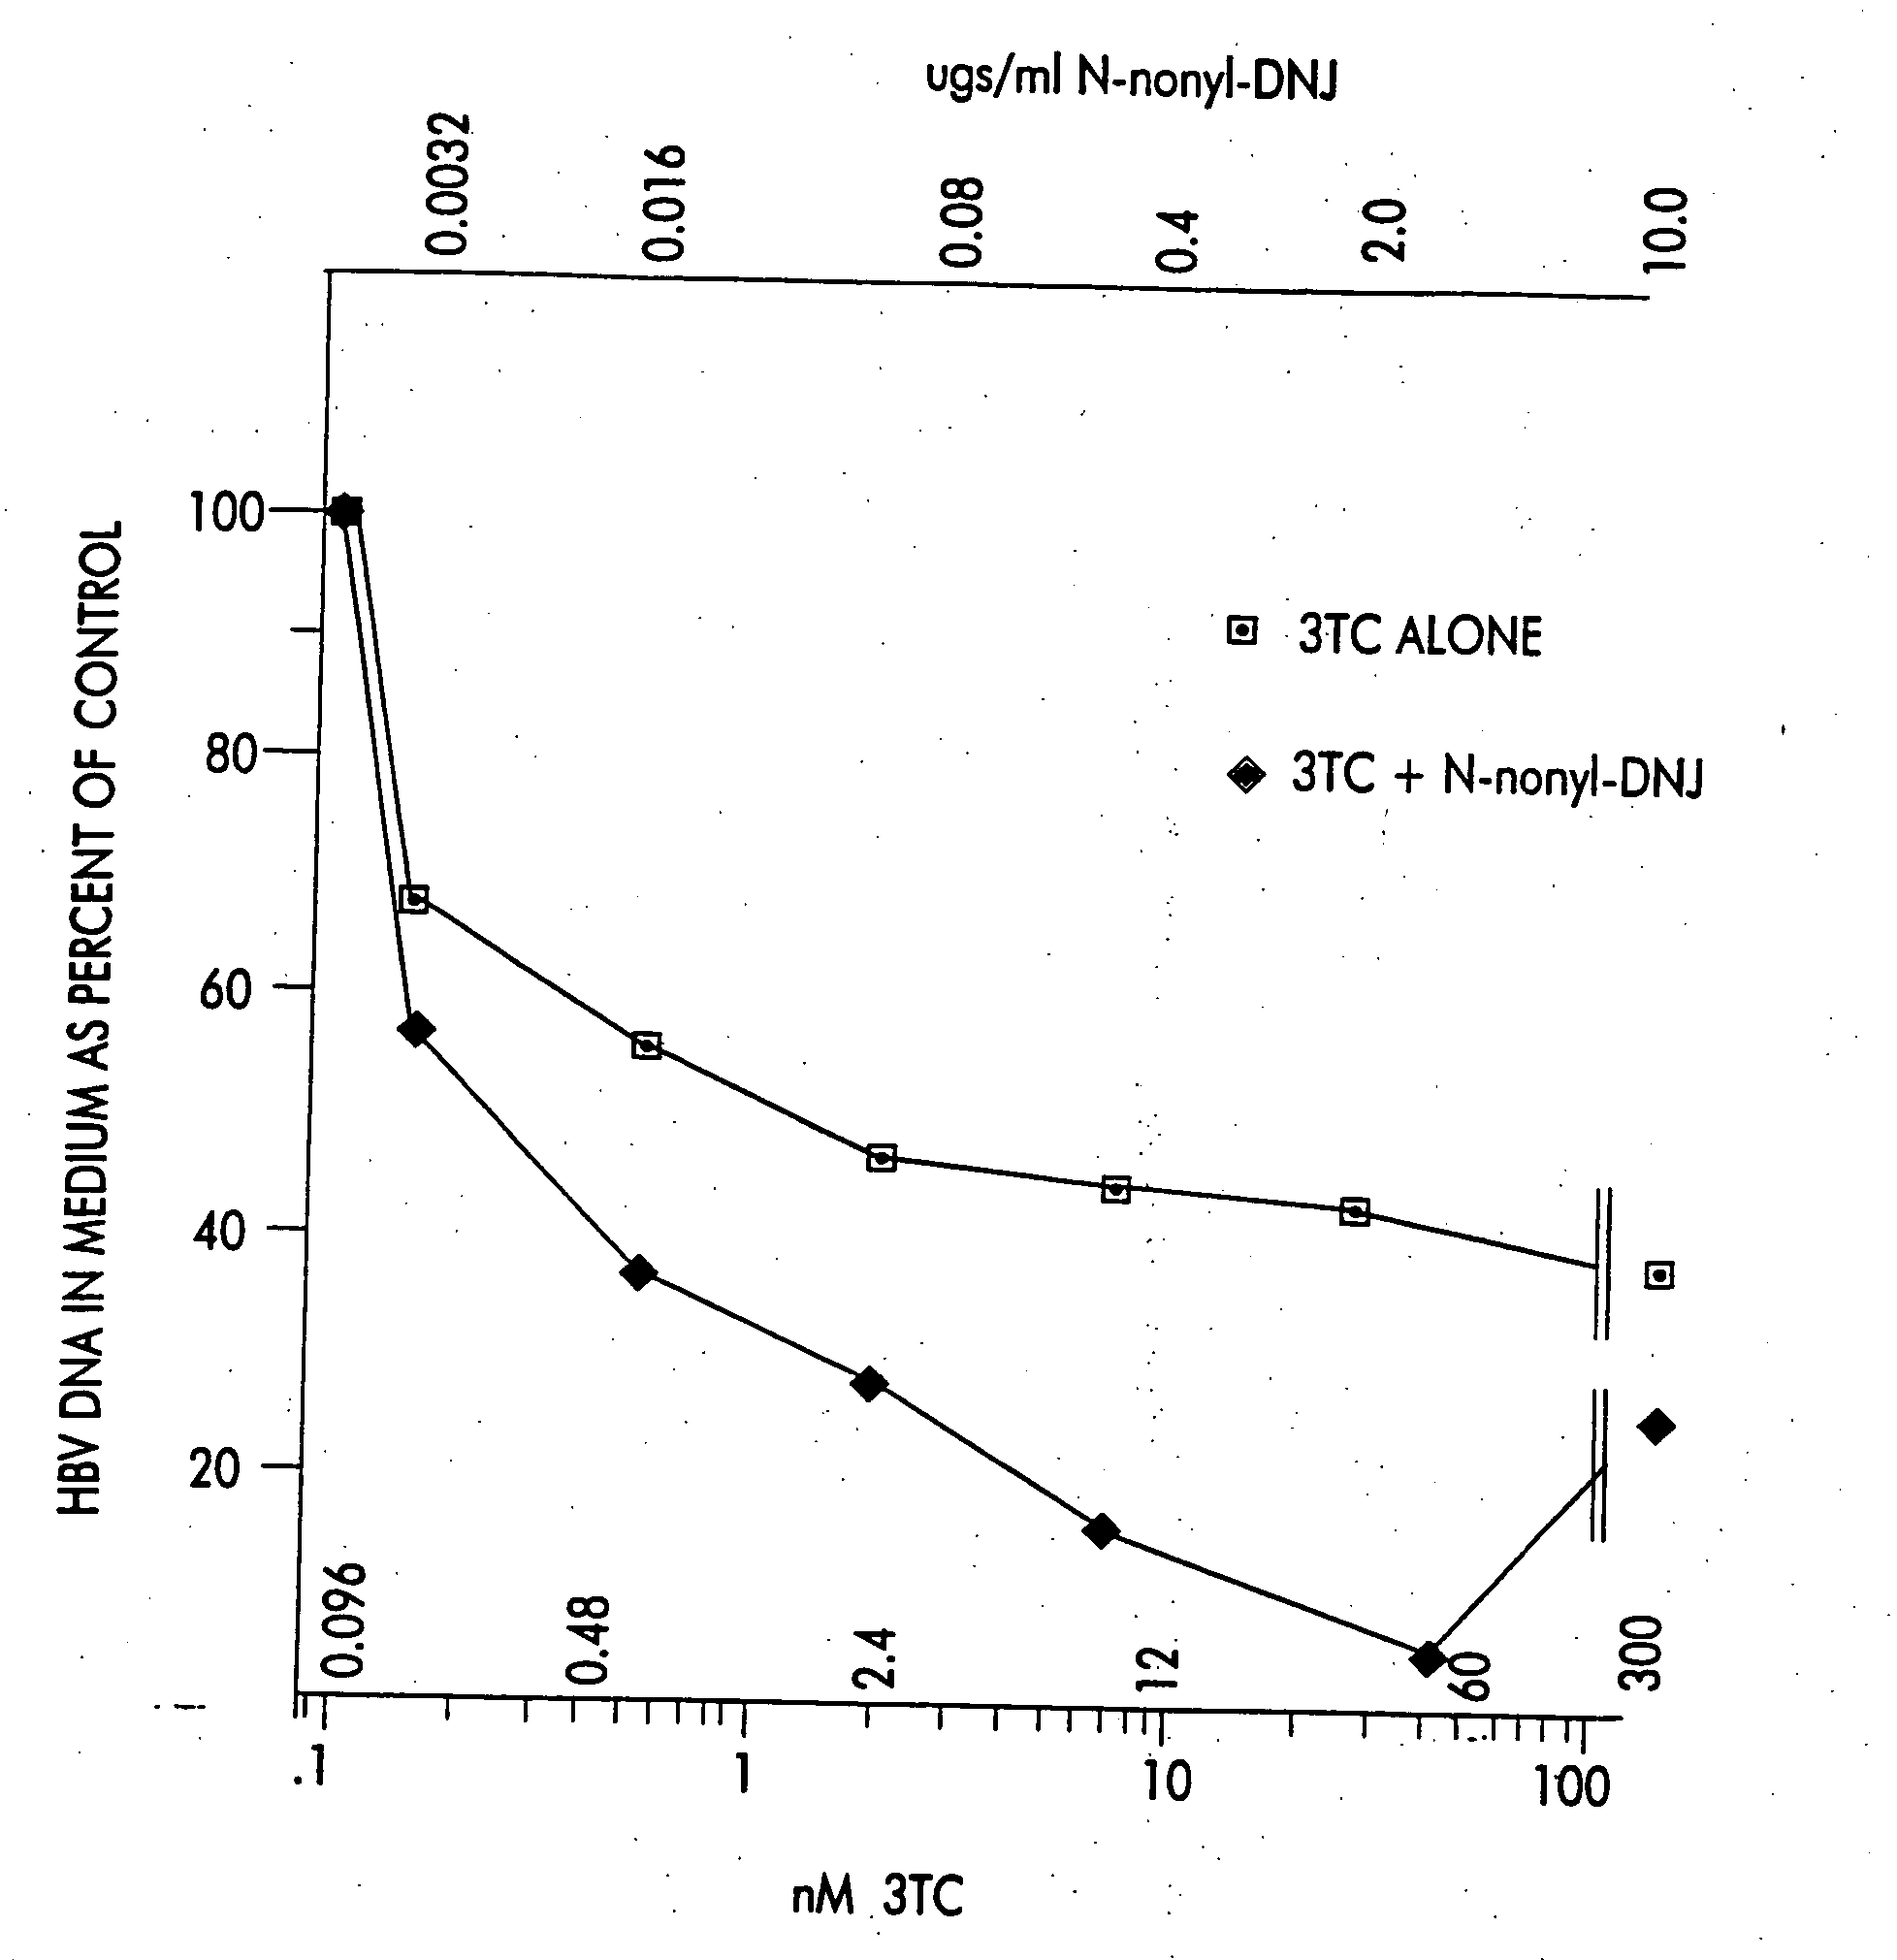 Methods of treating hepatitis virus infections with N-substituted-1,5-dideoxy-1,5-imino-D- glucuitol compounds in combination therapy